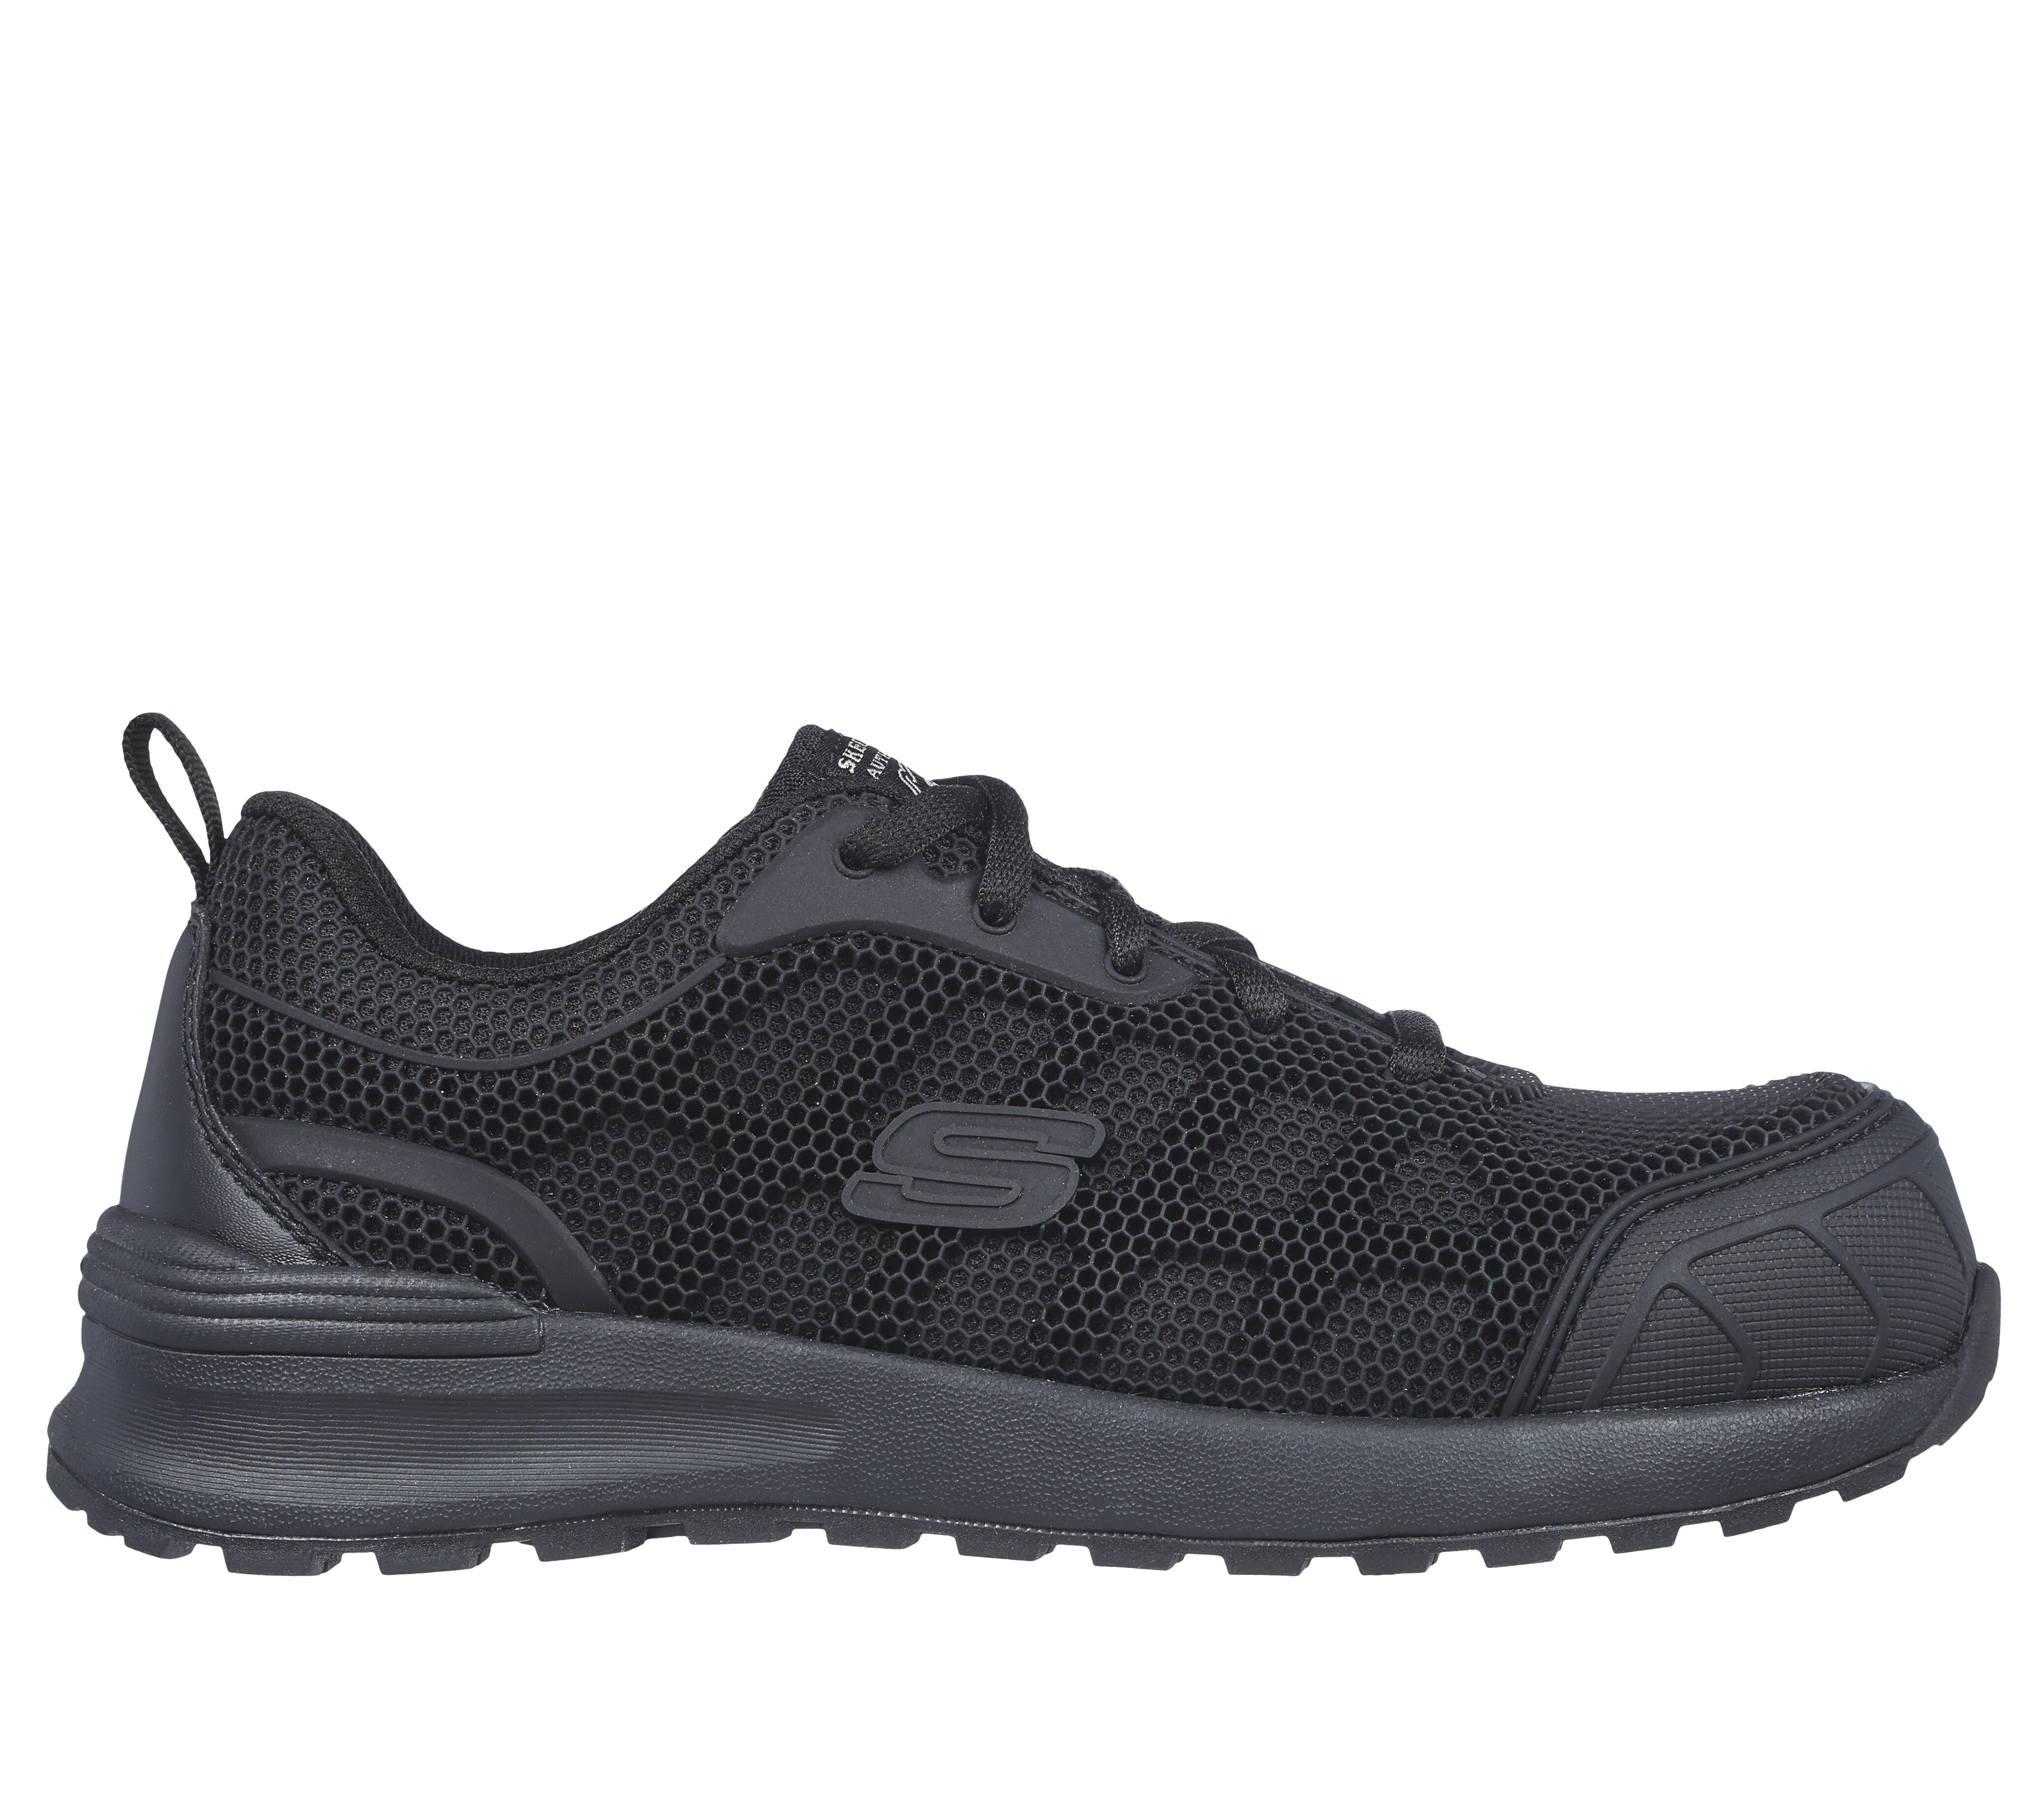 Work Safety Boots | Safety Toe Shoes | SKECHERS